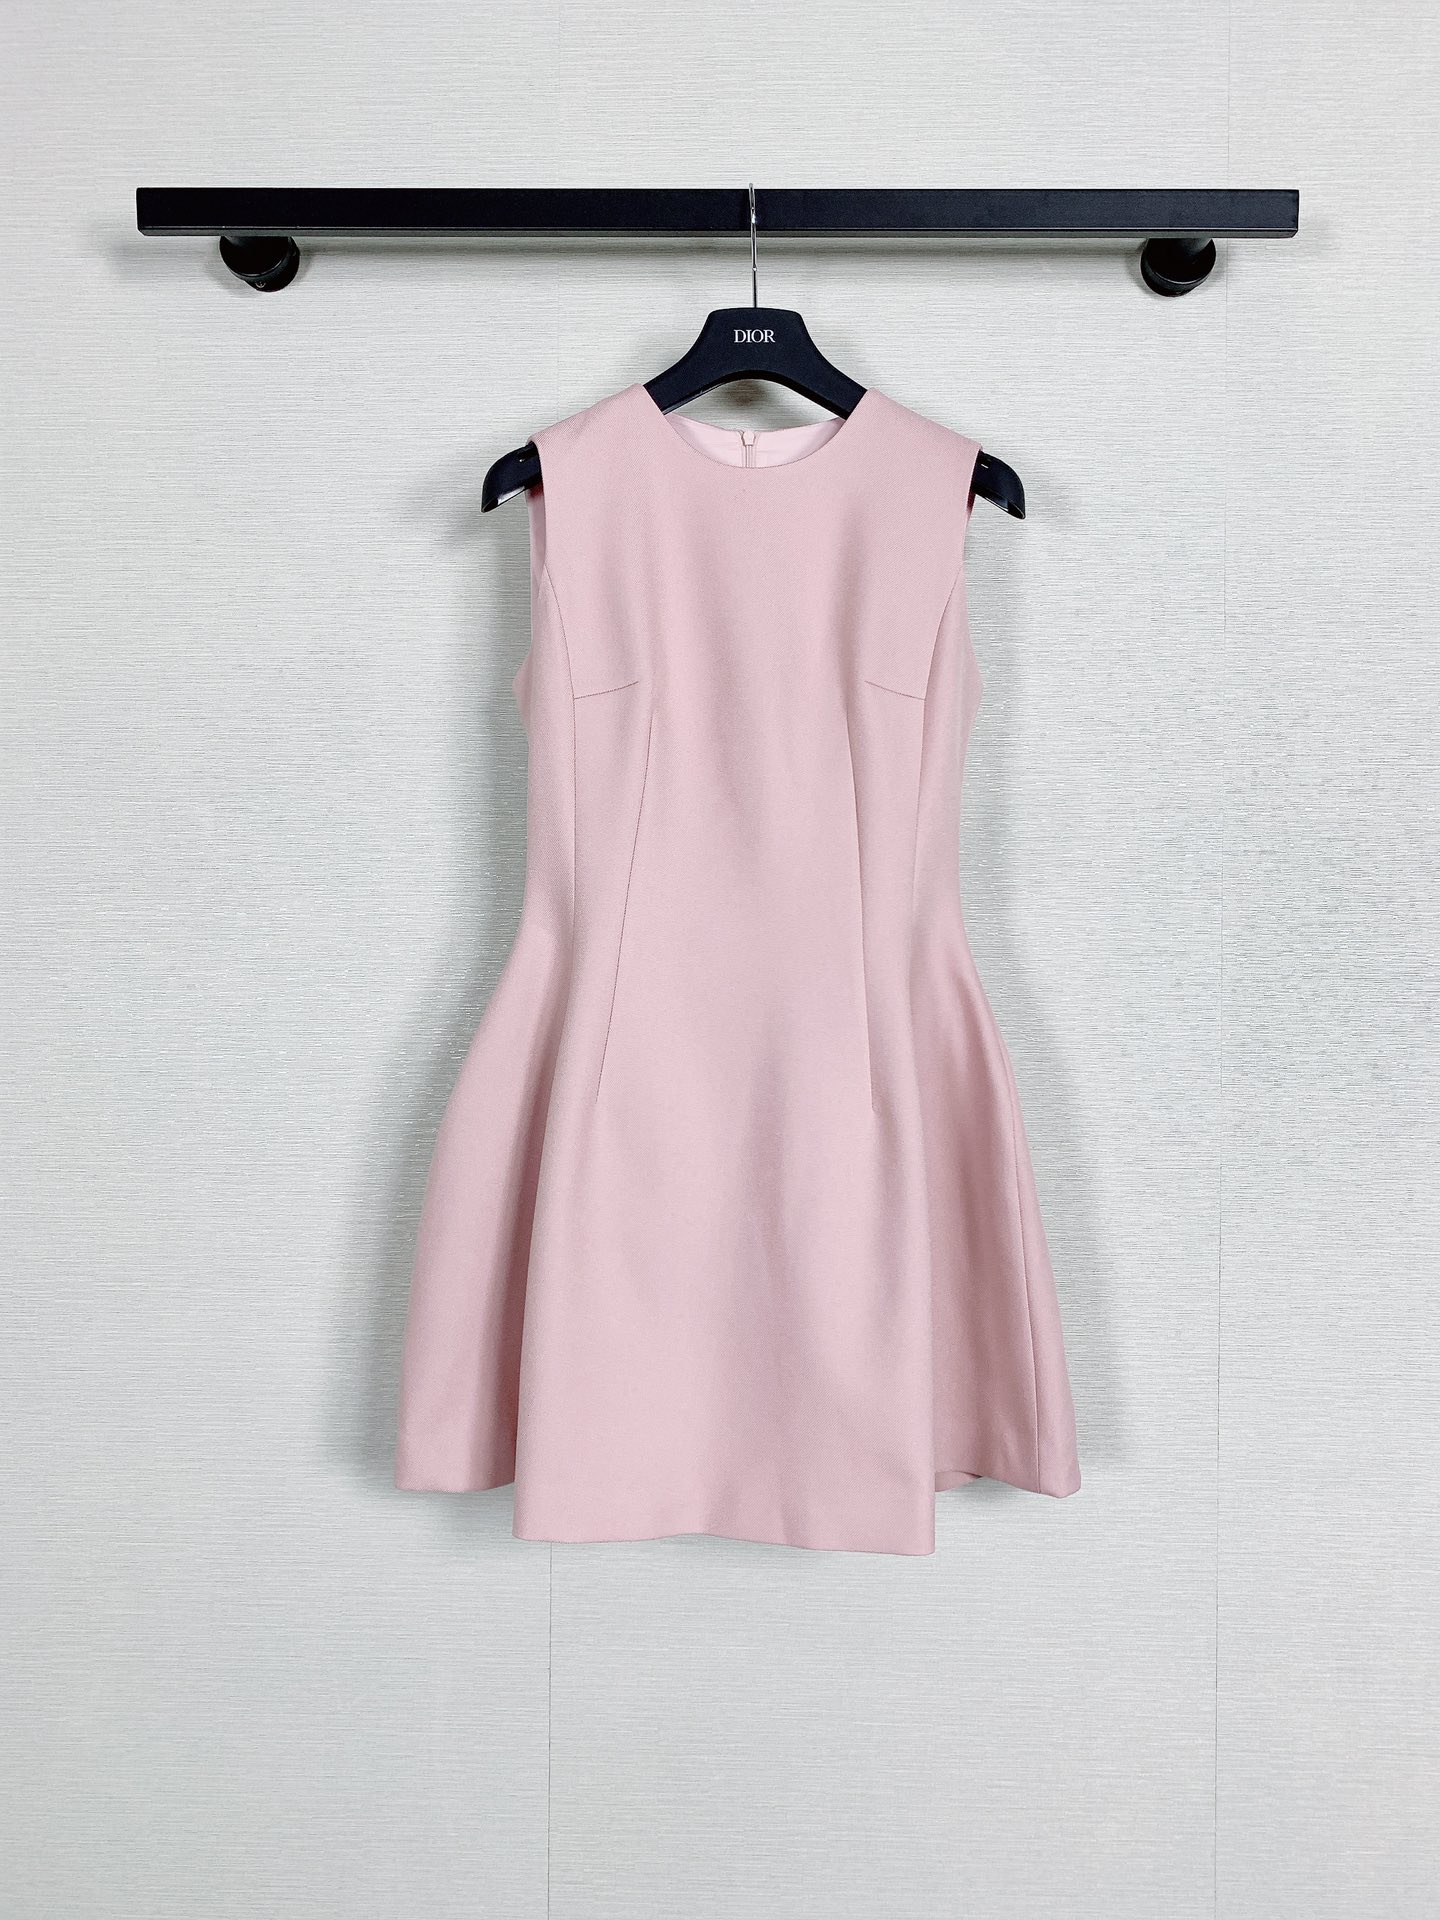 Dior Clothing Dresses Spring/Summer Collection